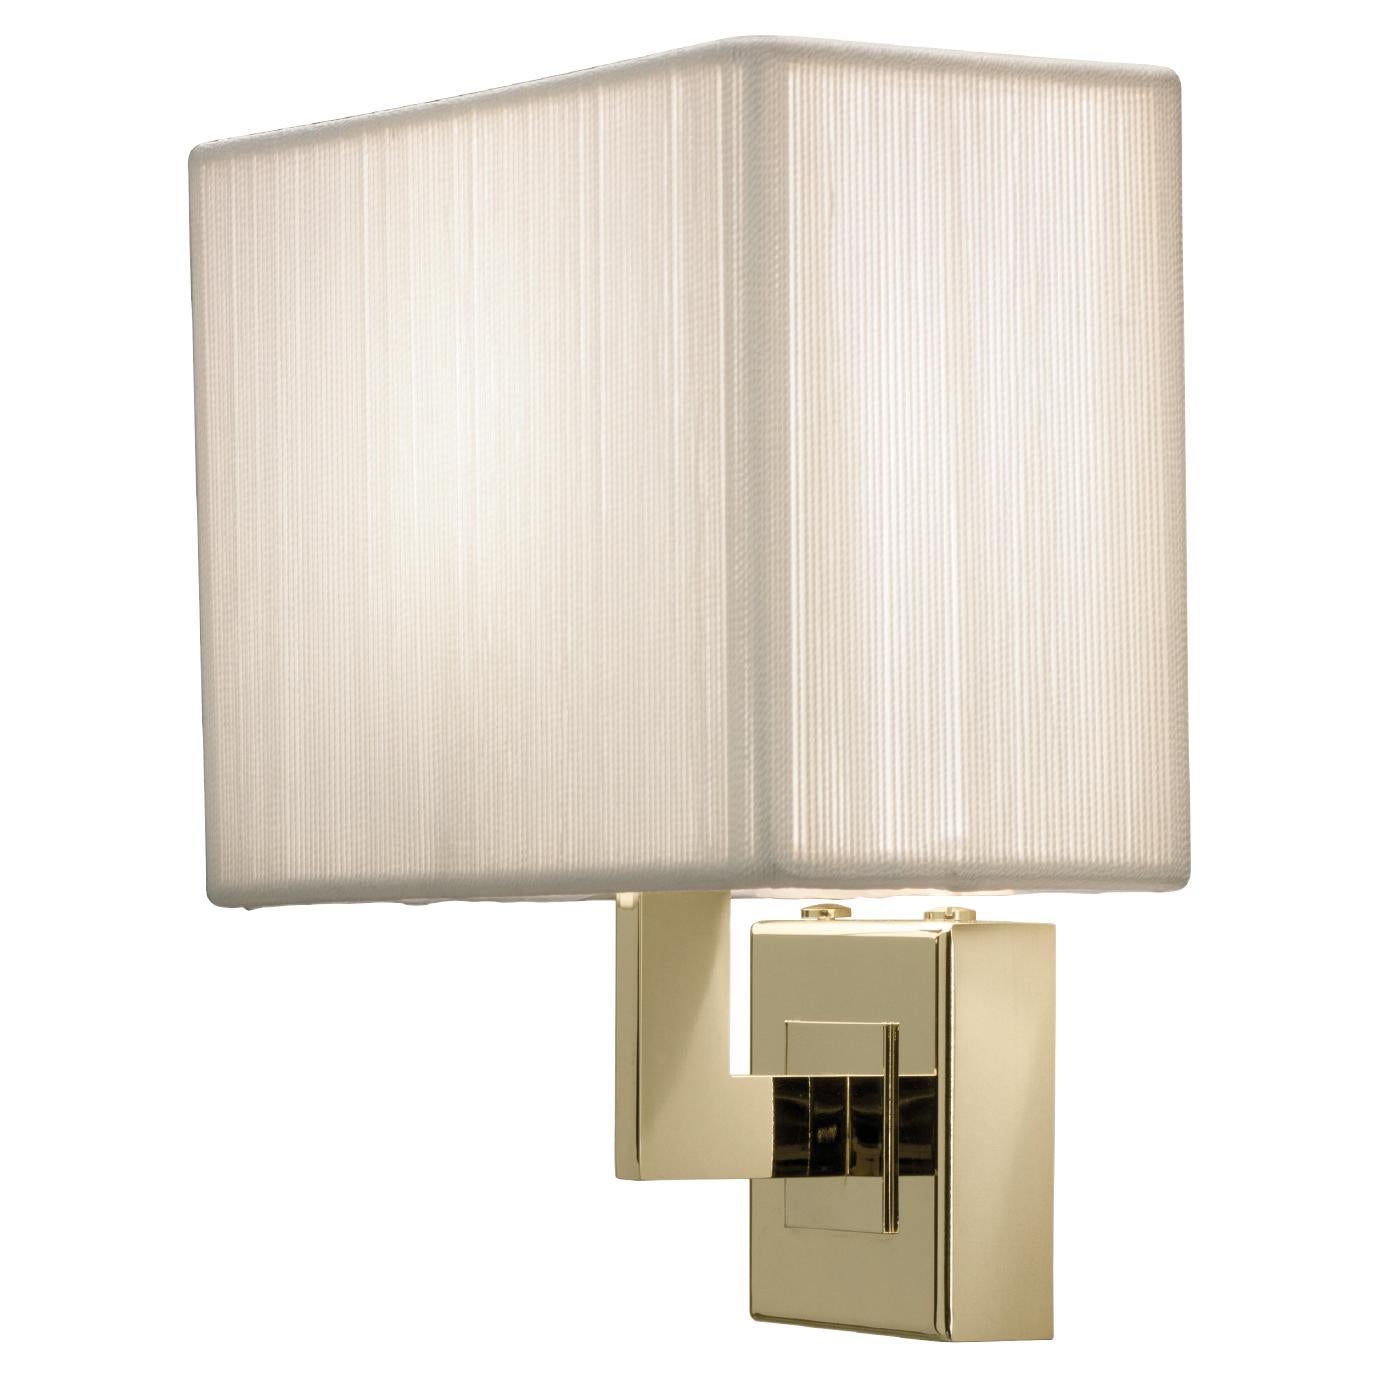 Axolight Clavius Small Wall Lamp with Arm in White Lampshade and Gold Finish For Sale